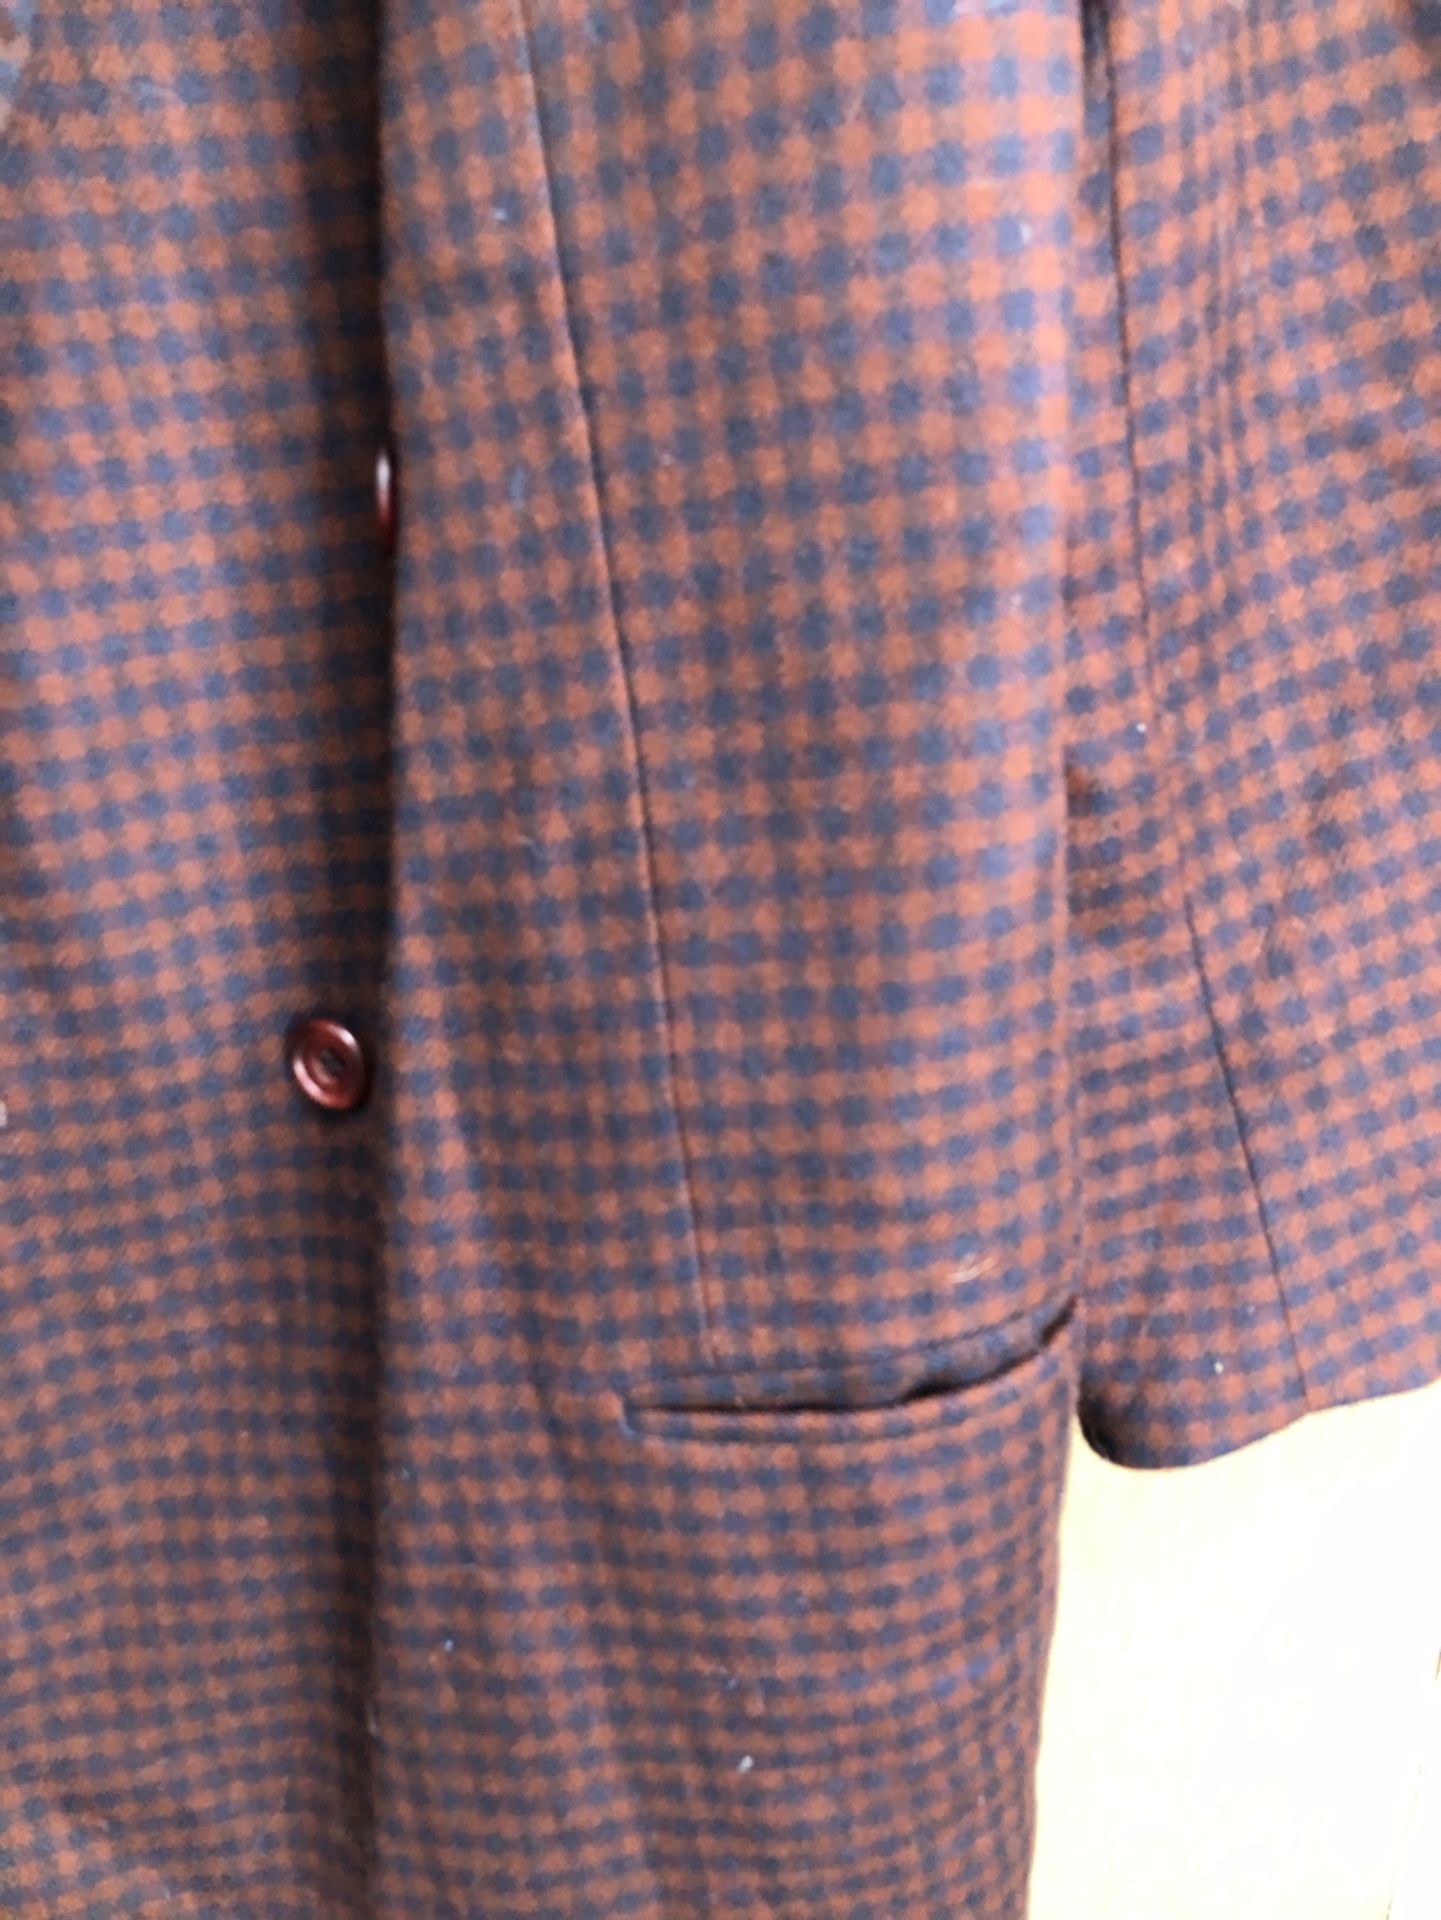 JACKET. HARRY HALL, MADE IN ENGLAND 100% WOOL AND LINED CHECK JACKET PIT TO PIT 43cms, SHOULDER TO - Image 7 of 11